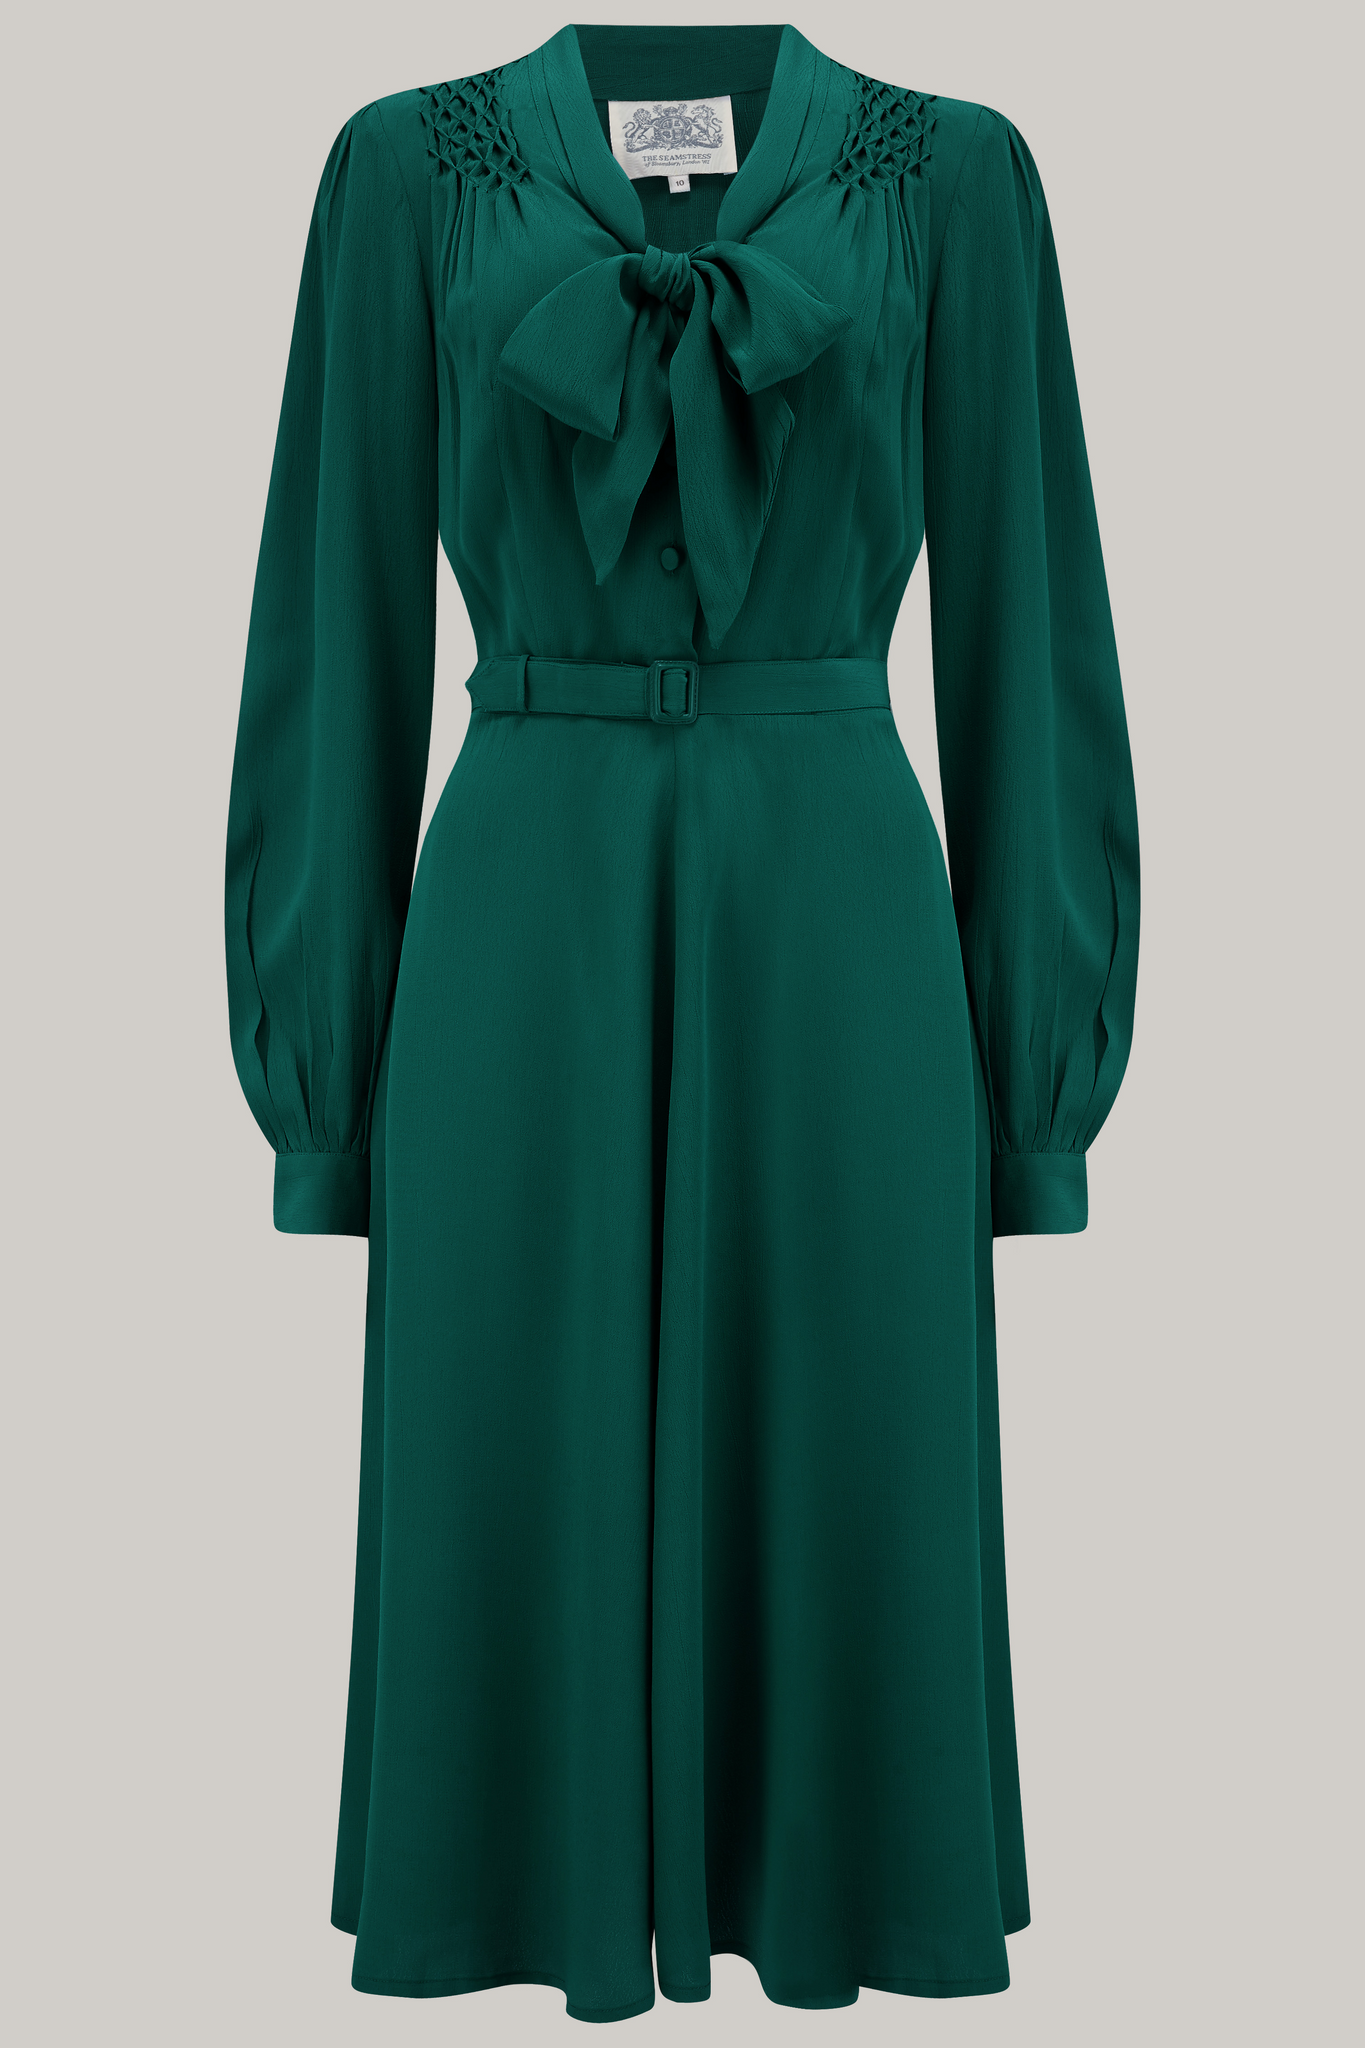 "Eva" Dress in Green , Classic 1940's Style Long Sleeve Dress with Tie Neck - True and authentic vintage style clothing, inspired by the Classic styles of CC41 , WW2 and the fun 1950s RocknRoll era, for everyday wear plus events like Goodwood Revival, Twinwood Festival and Viva Las Vegas Rockabilly Weekend Rock n Romance The Seamstress Of Bloomsbury